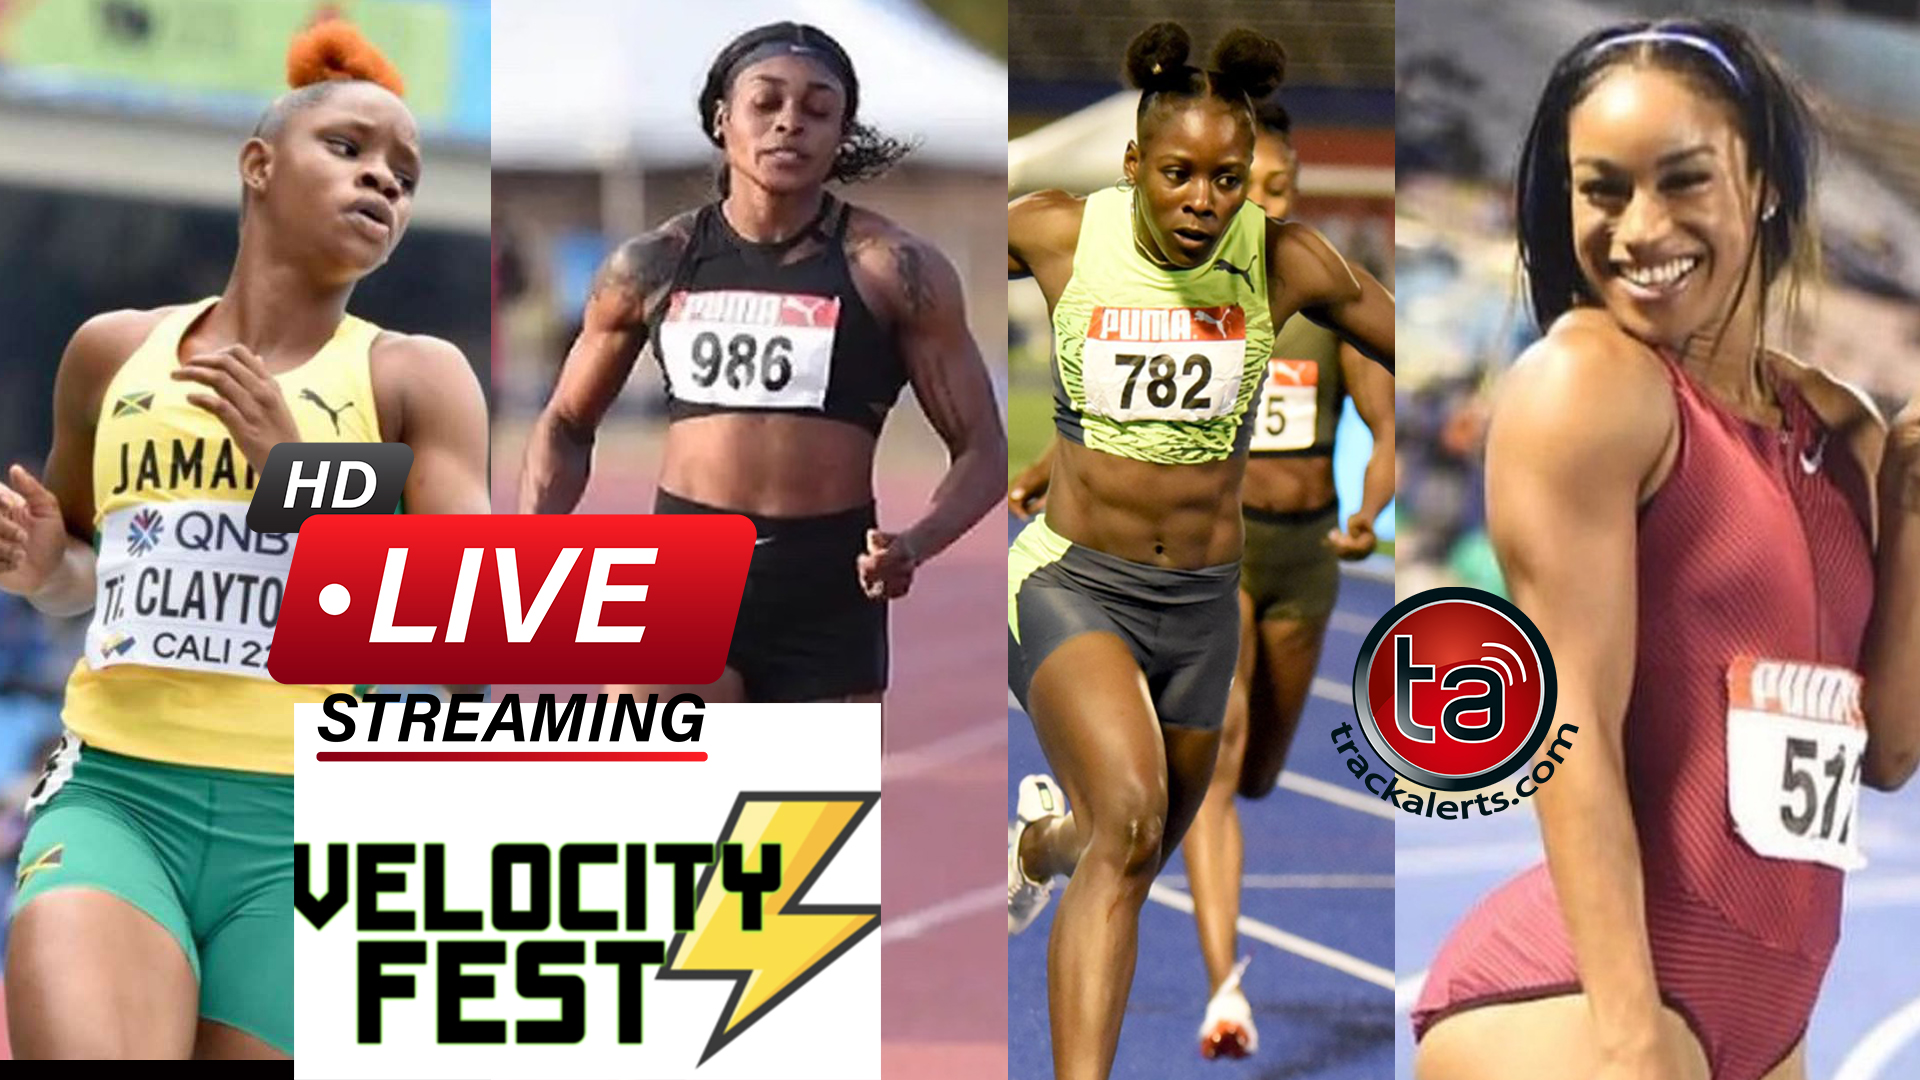 Velocity Fest 13: A Stellar Lineup of Athletics Superstars Light Up the Track in Kingston!